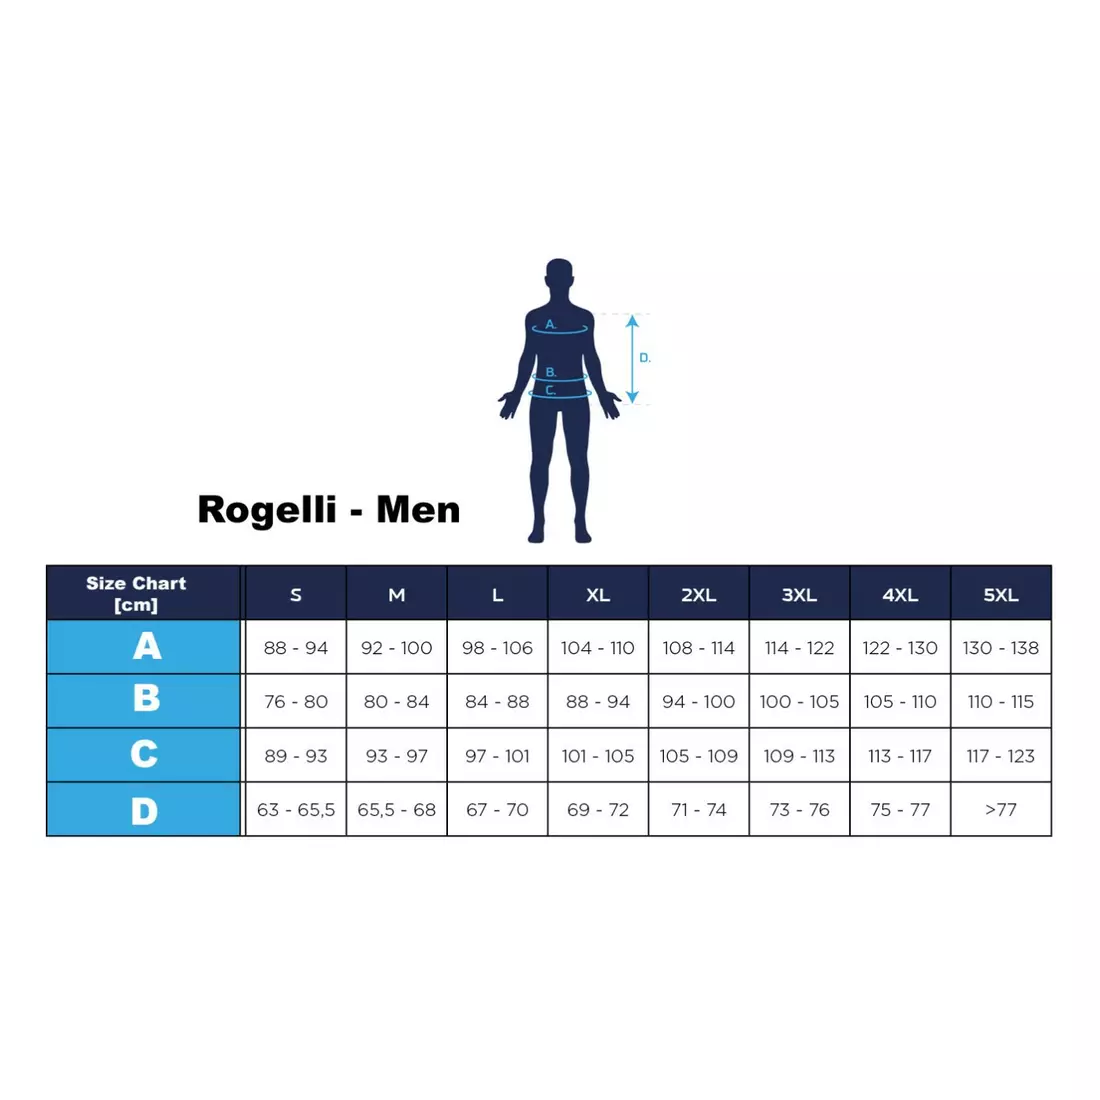 Rogelli Men's winter cycling jacket, softshell BRAVE blue and lime ROG351026